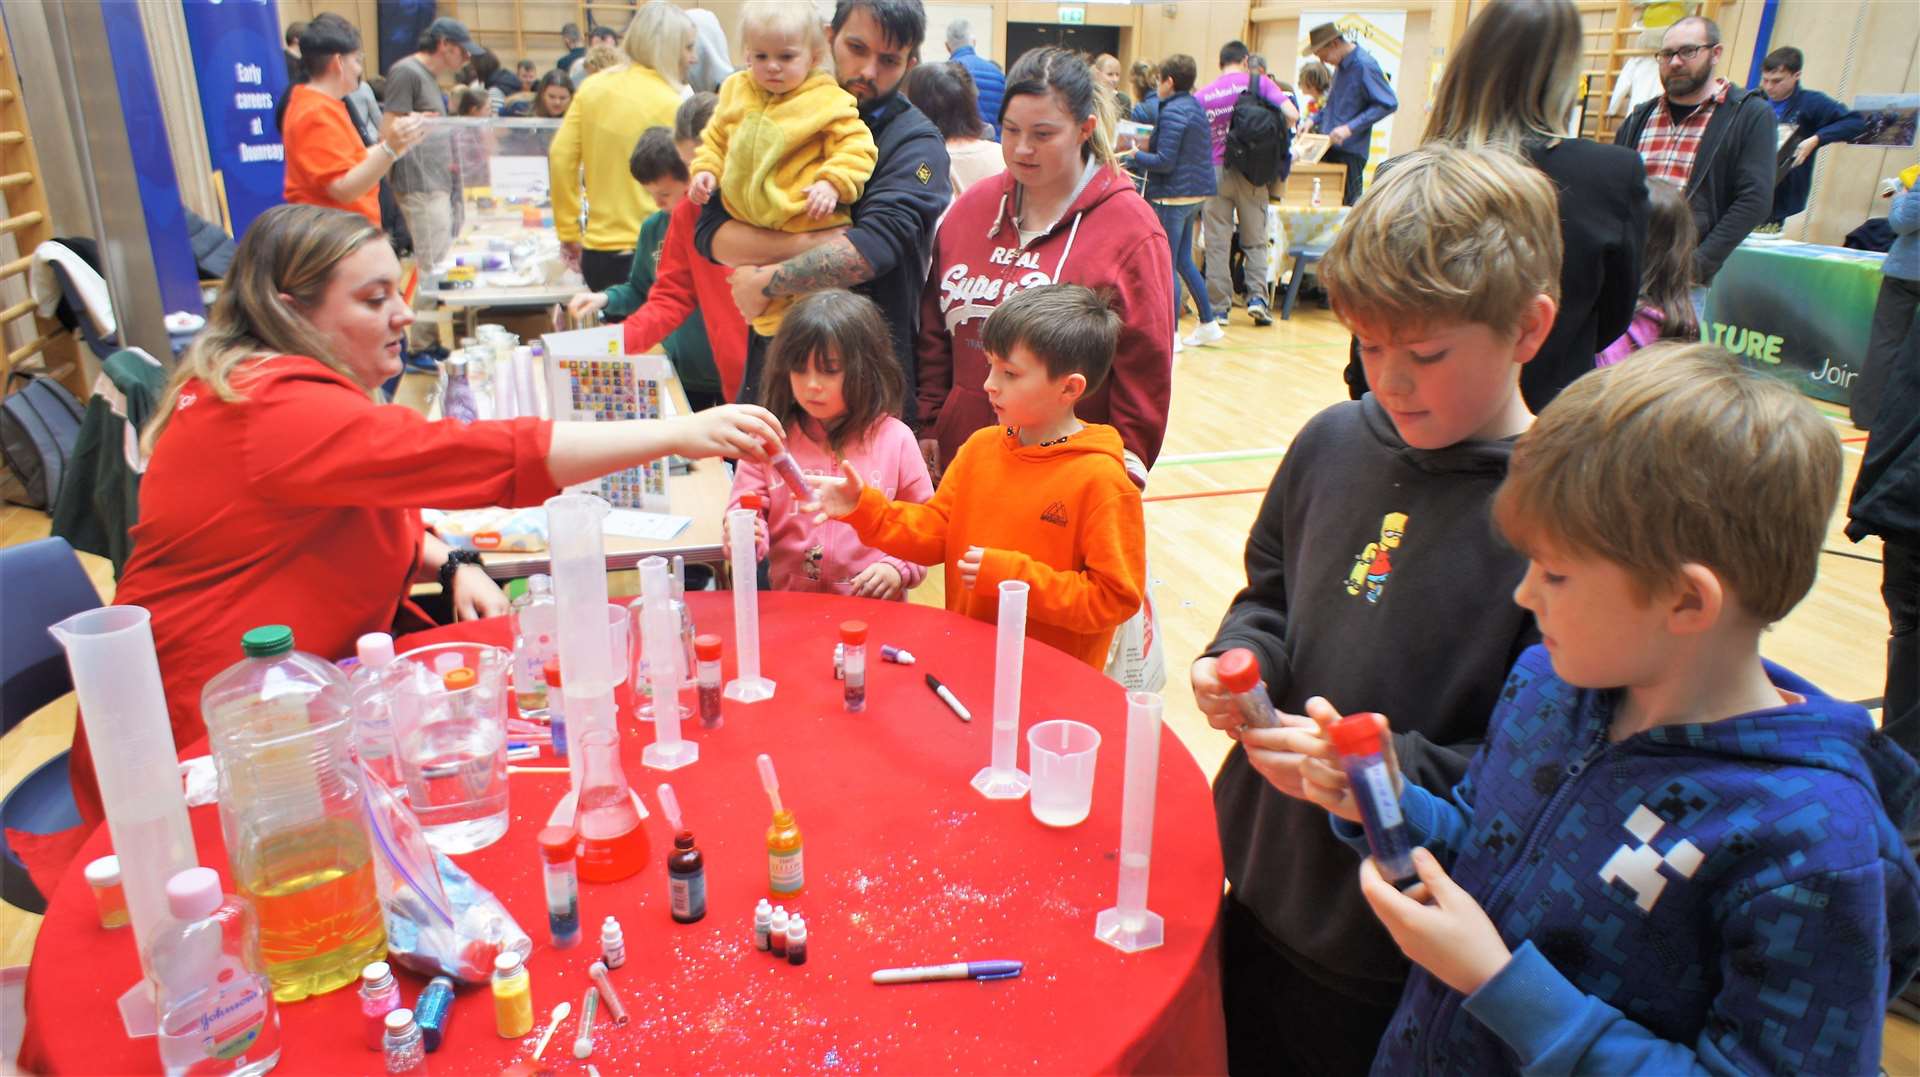 Children getting involved in chemistry experiments with PhD students from Edinburgh University at the 2022 Caithness International Science Festival family fun day. Picture: DGS